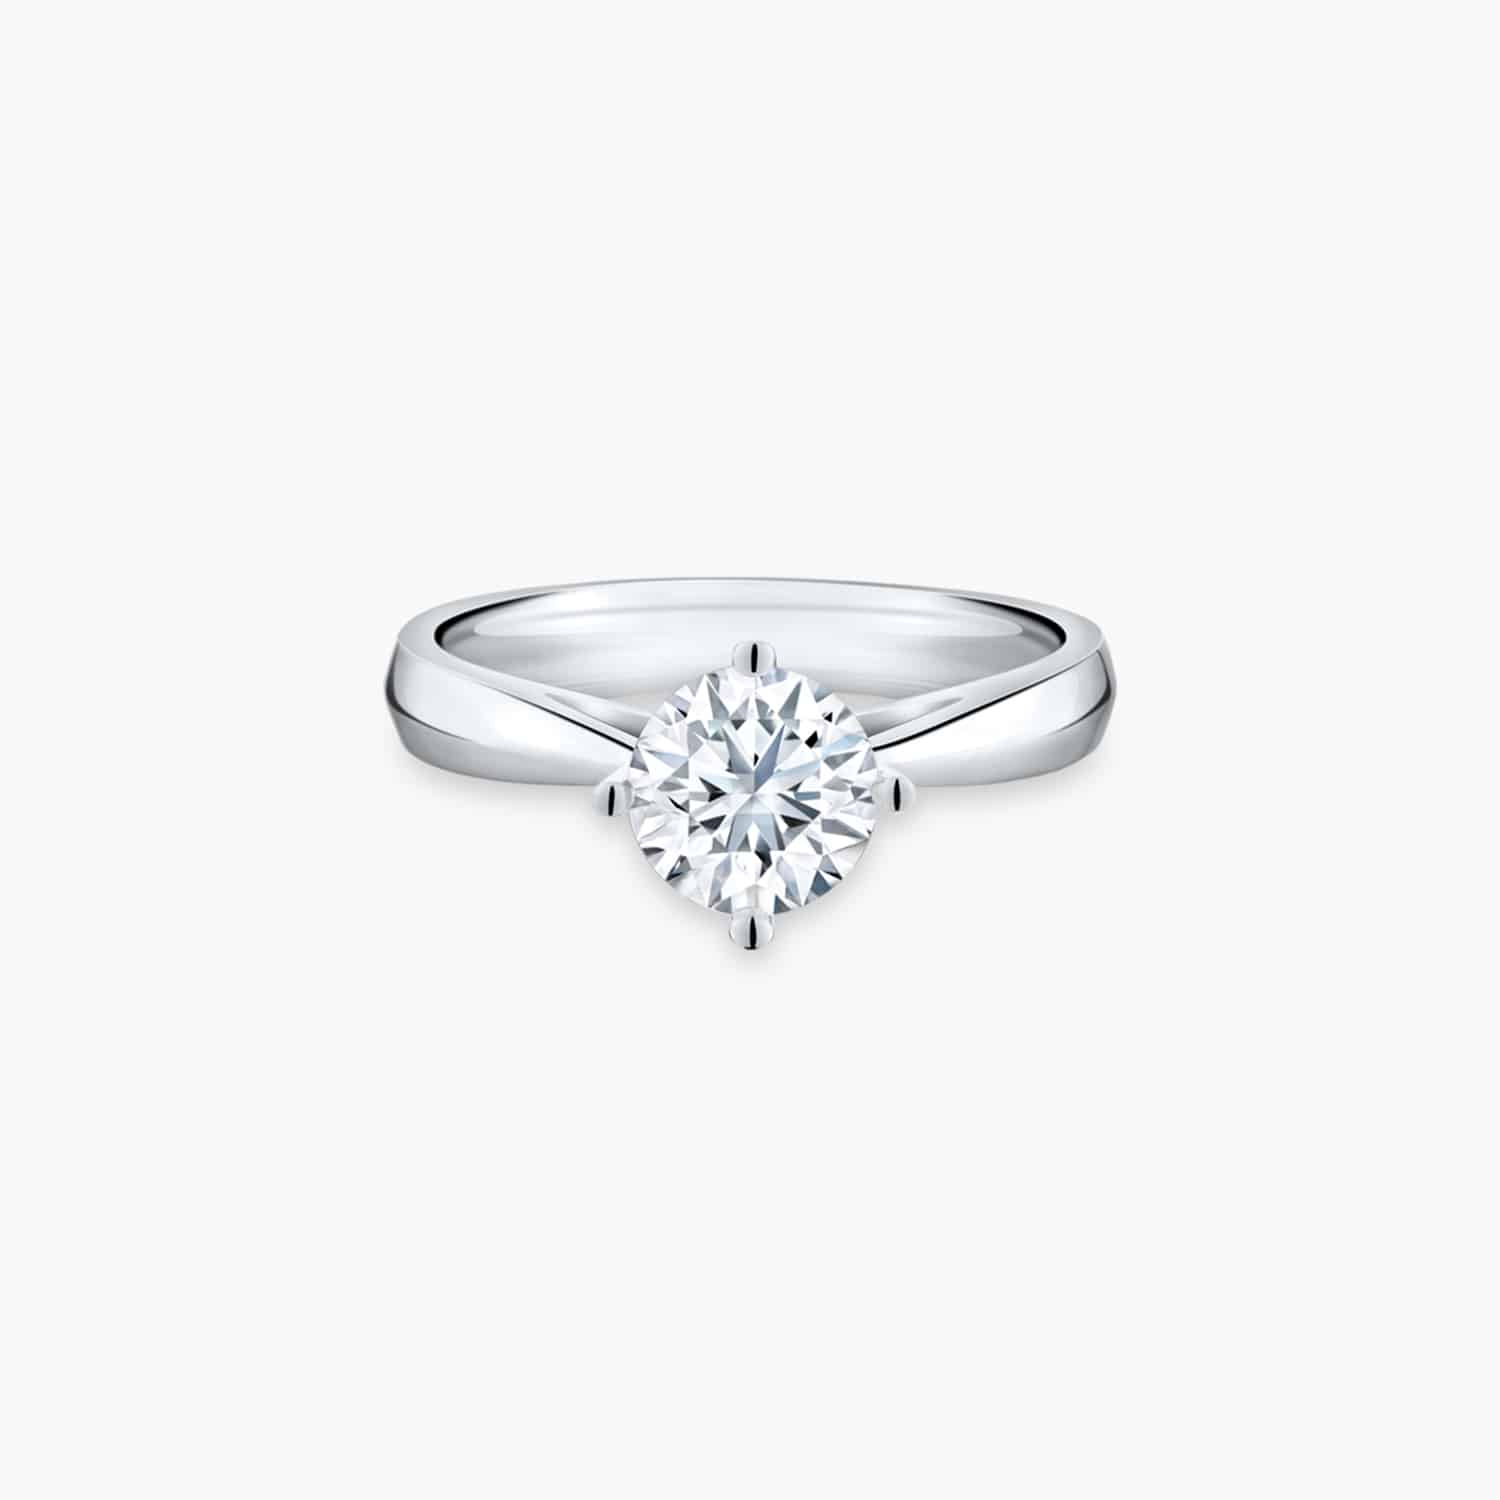 Amazon.com: Lafeil Engagement Ring 925 Sterling Silver Hypoallergenic Size  678 Imitation Diamond 6 Claw Bridal Ring Wife Lover Jewelry Gift,6 :  Clothing, Shoes & Jewelry